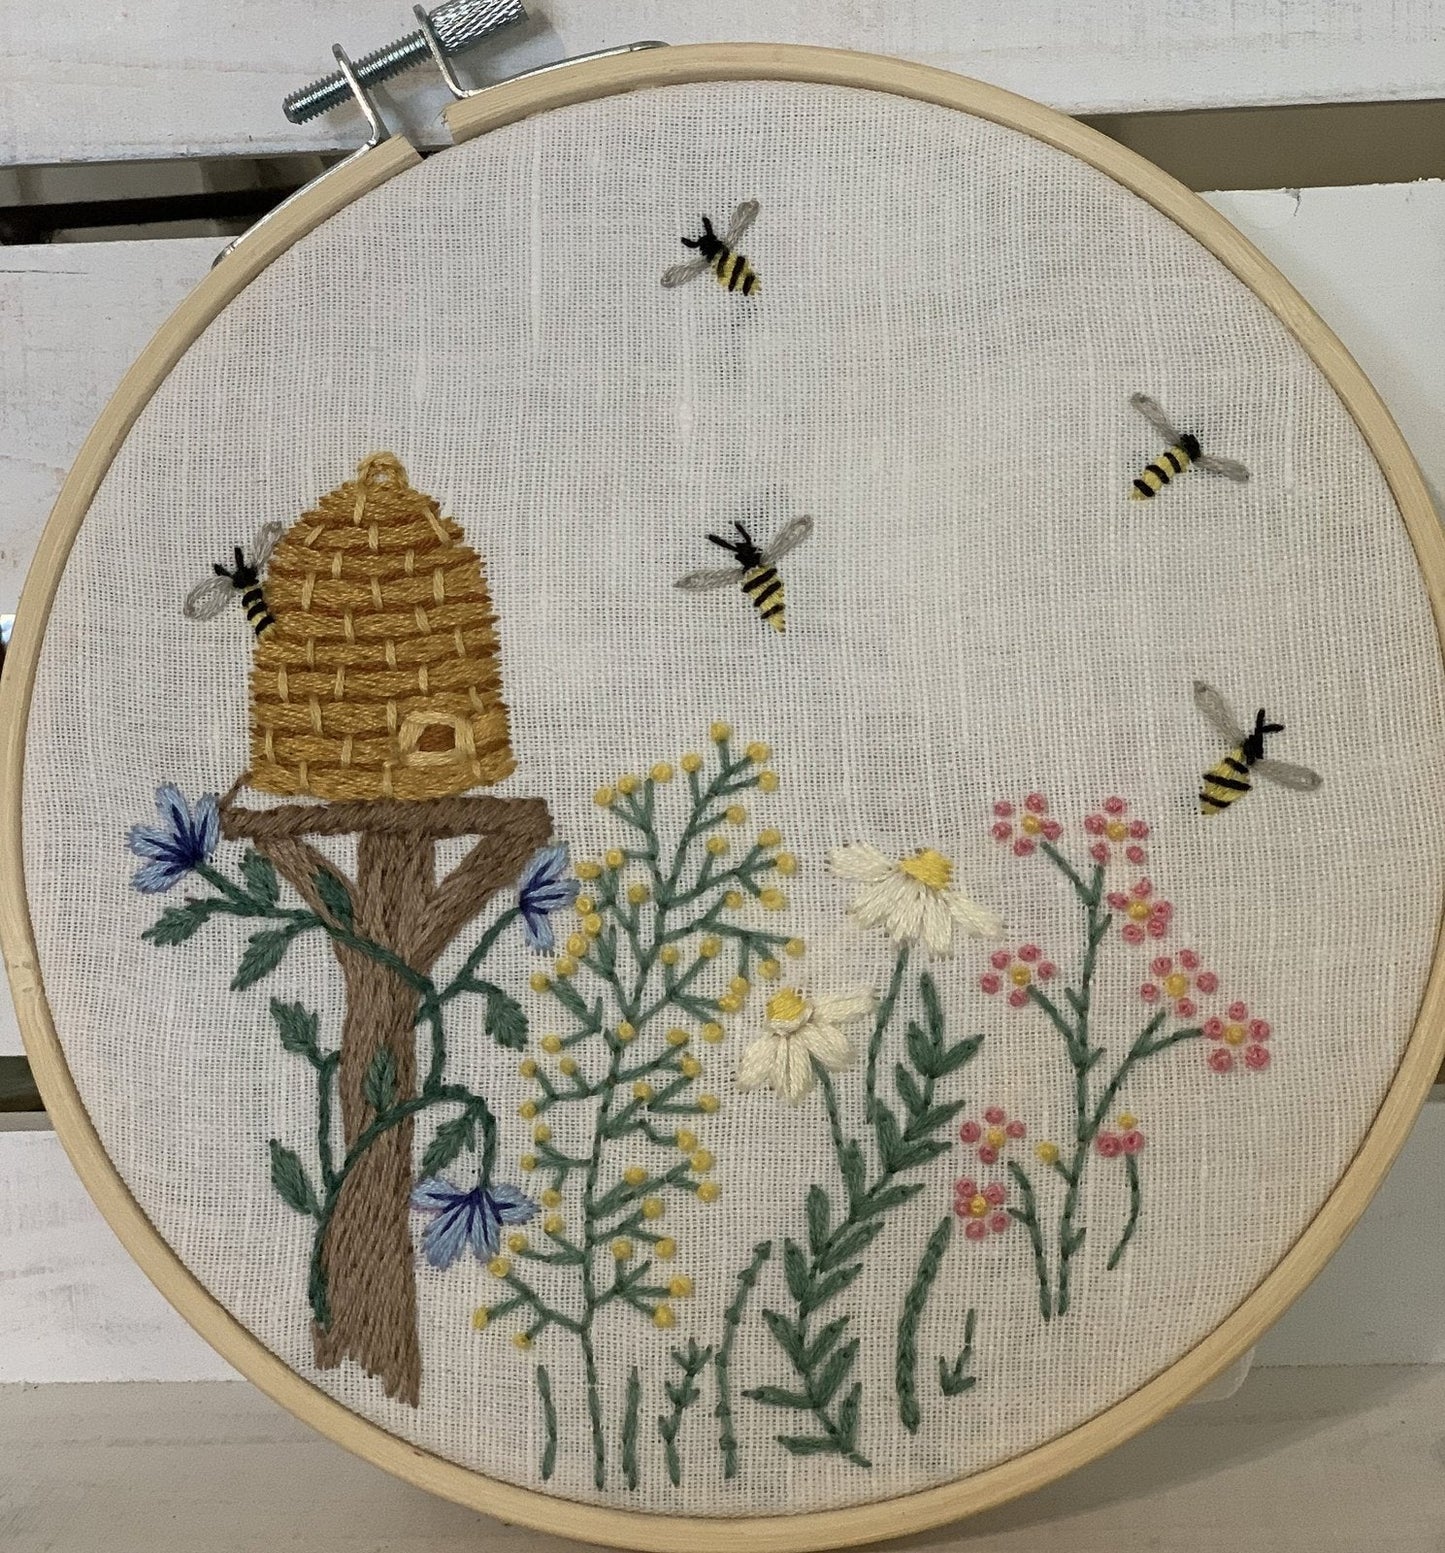 6" Bee Happy - Bee Hive in the Garden Embroidery Kit